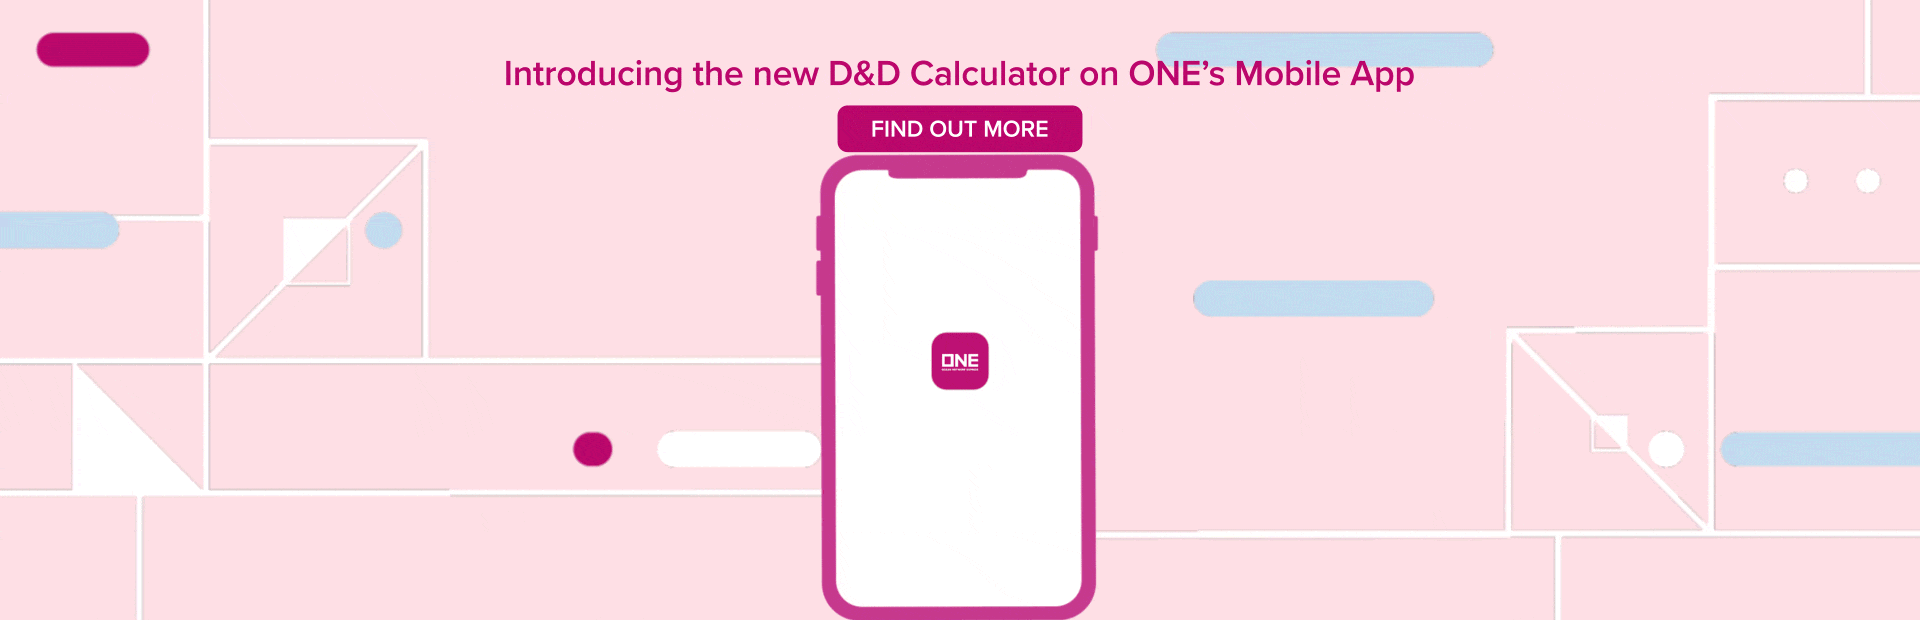 Introducing the new D&D Calculator on ONE’s Mobile App